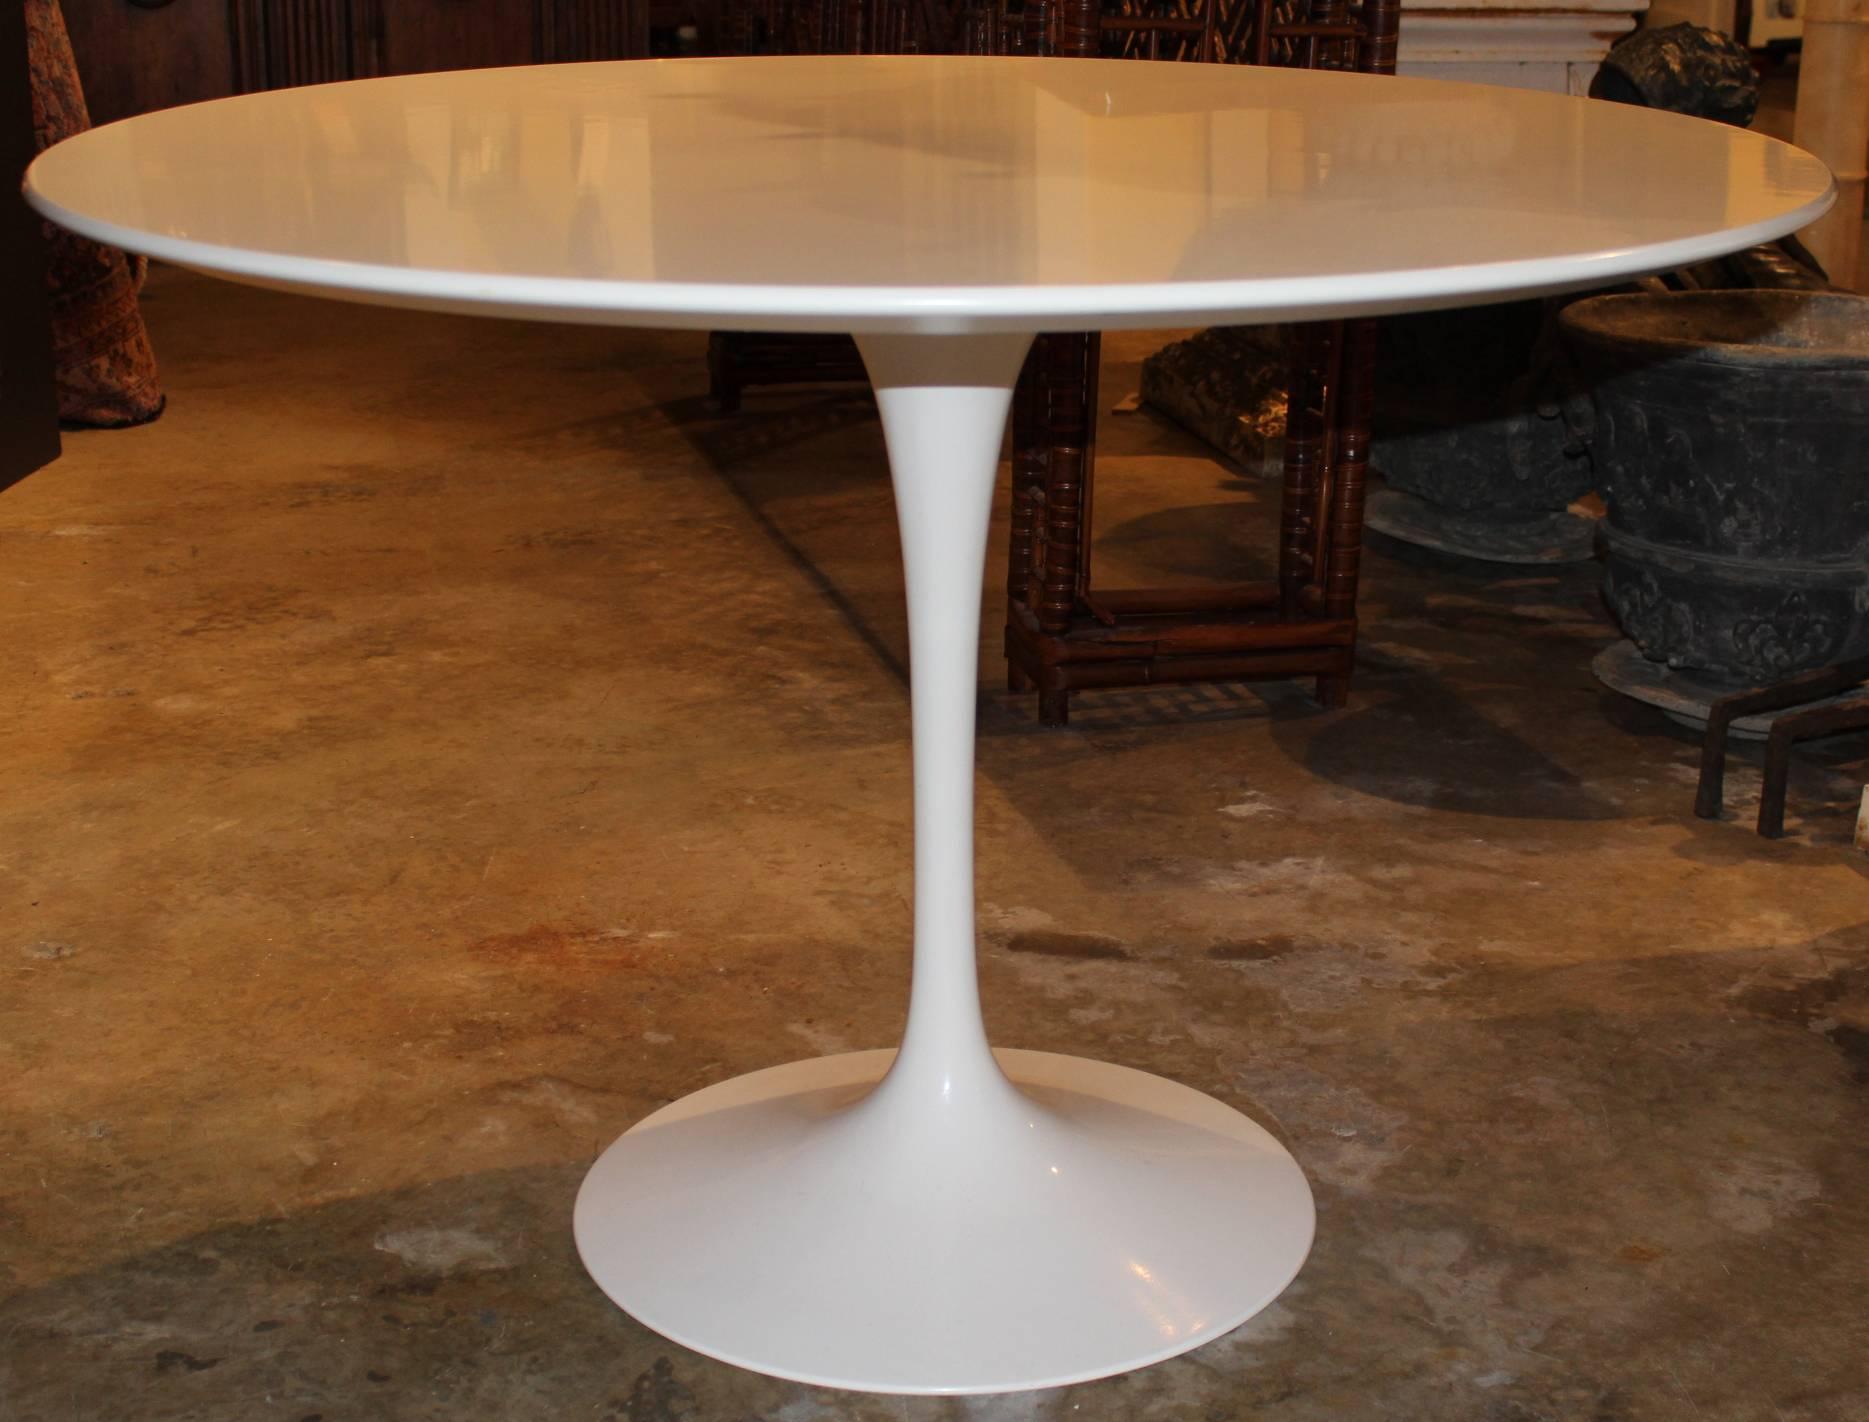 A fine example of a Mid-Century Modern style laminate round dining table with white painted cast aluminium base, with four molded fiberglass padded tulip armless chairs with aluminium bases designed by Eero Saarinen for Knoll International. Embossed